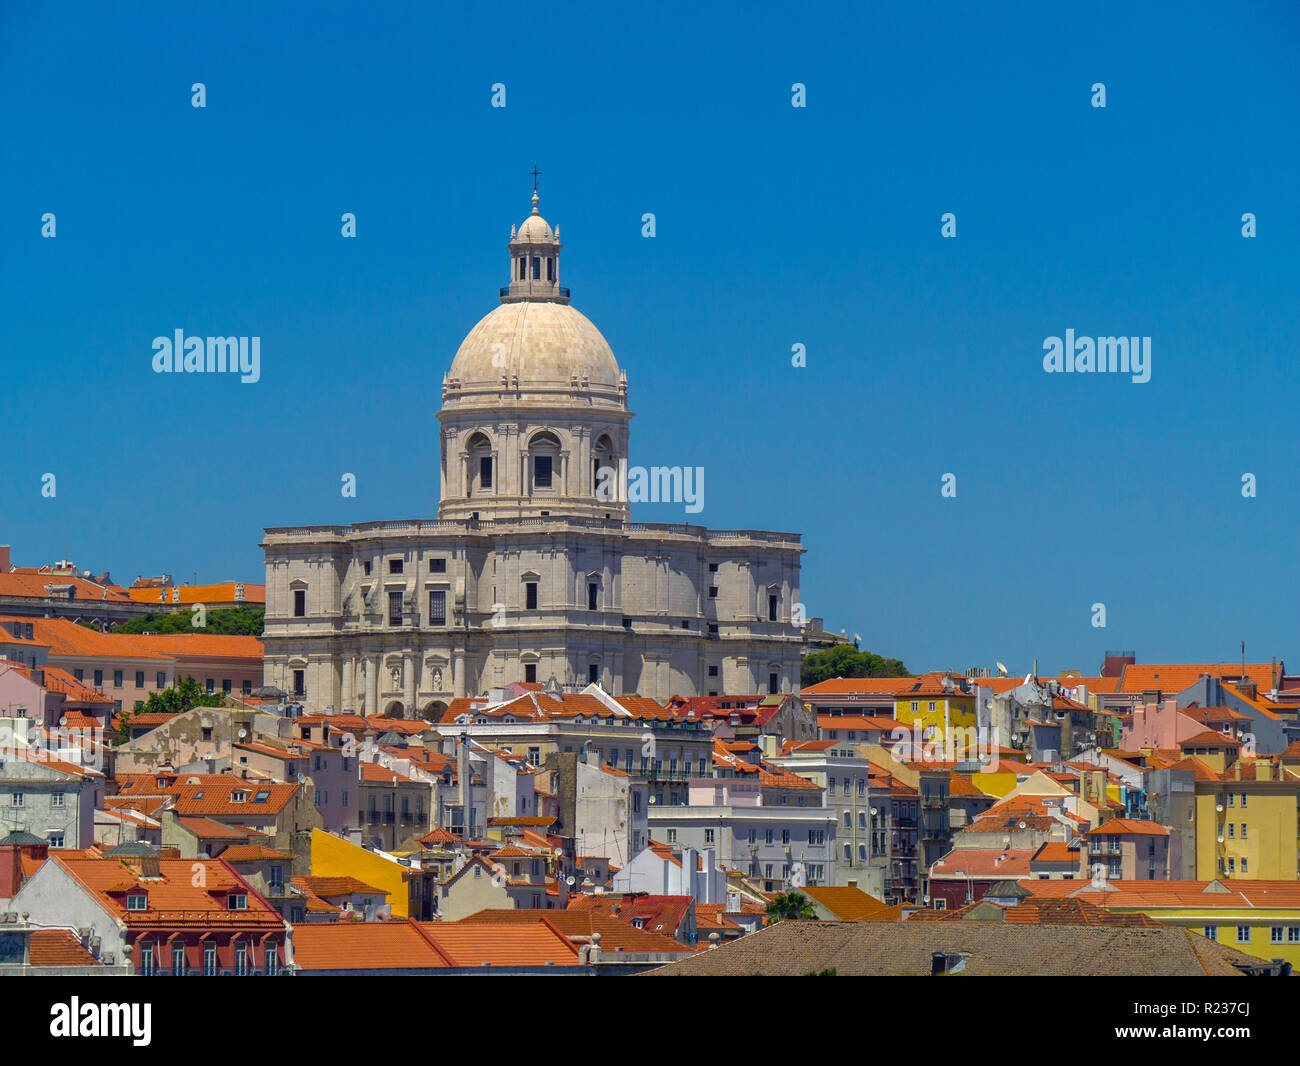 Joao antunes hi-res stock photography and images - Alamy